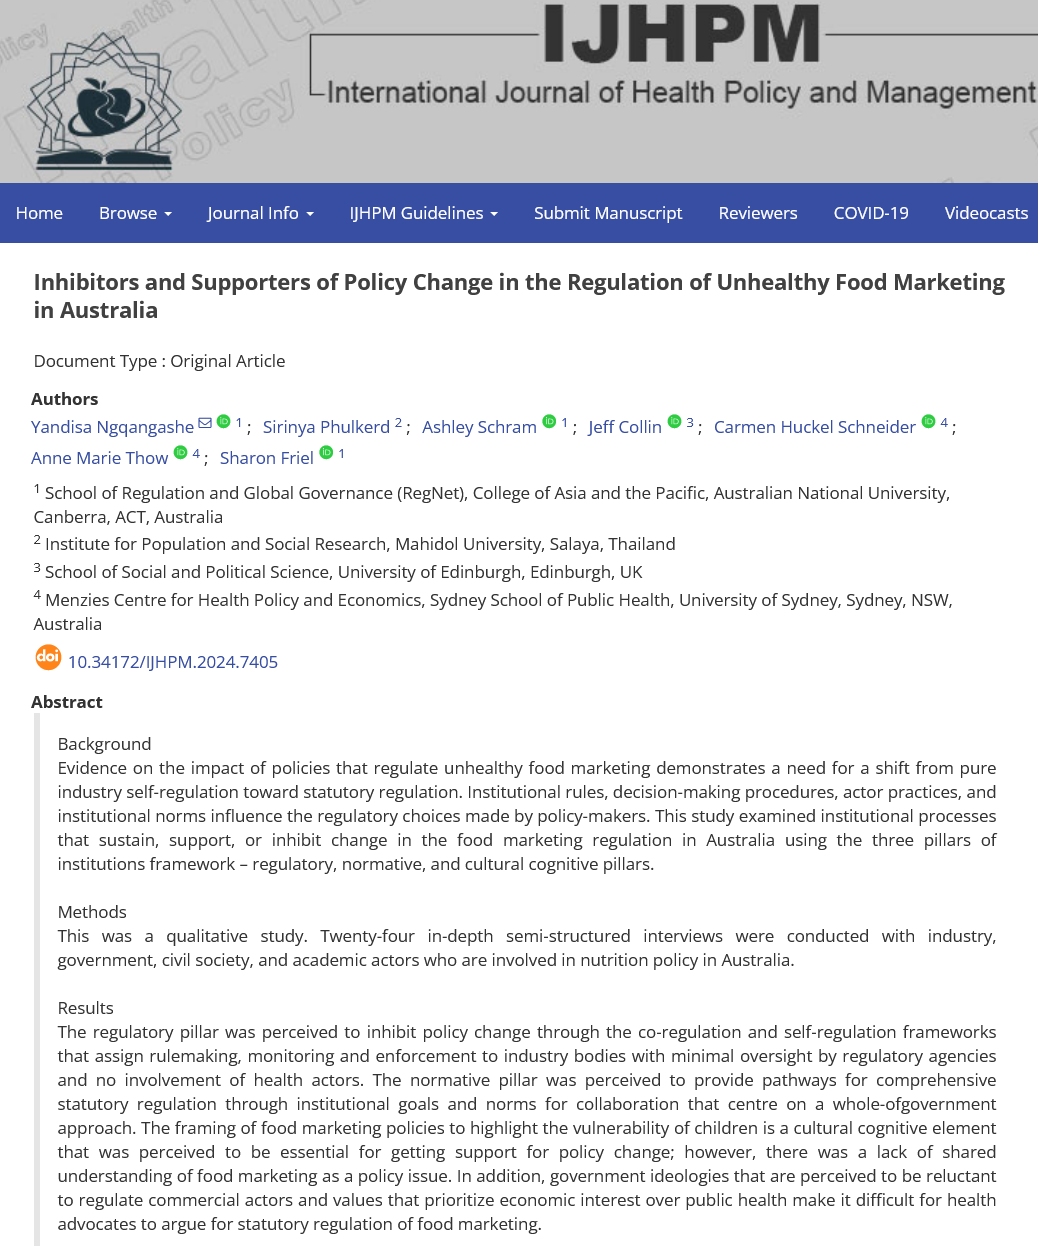 Inhibitors and Supporters of Policy Change in the Regulation of Unhealthy Food Marketing in Australia